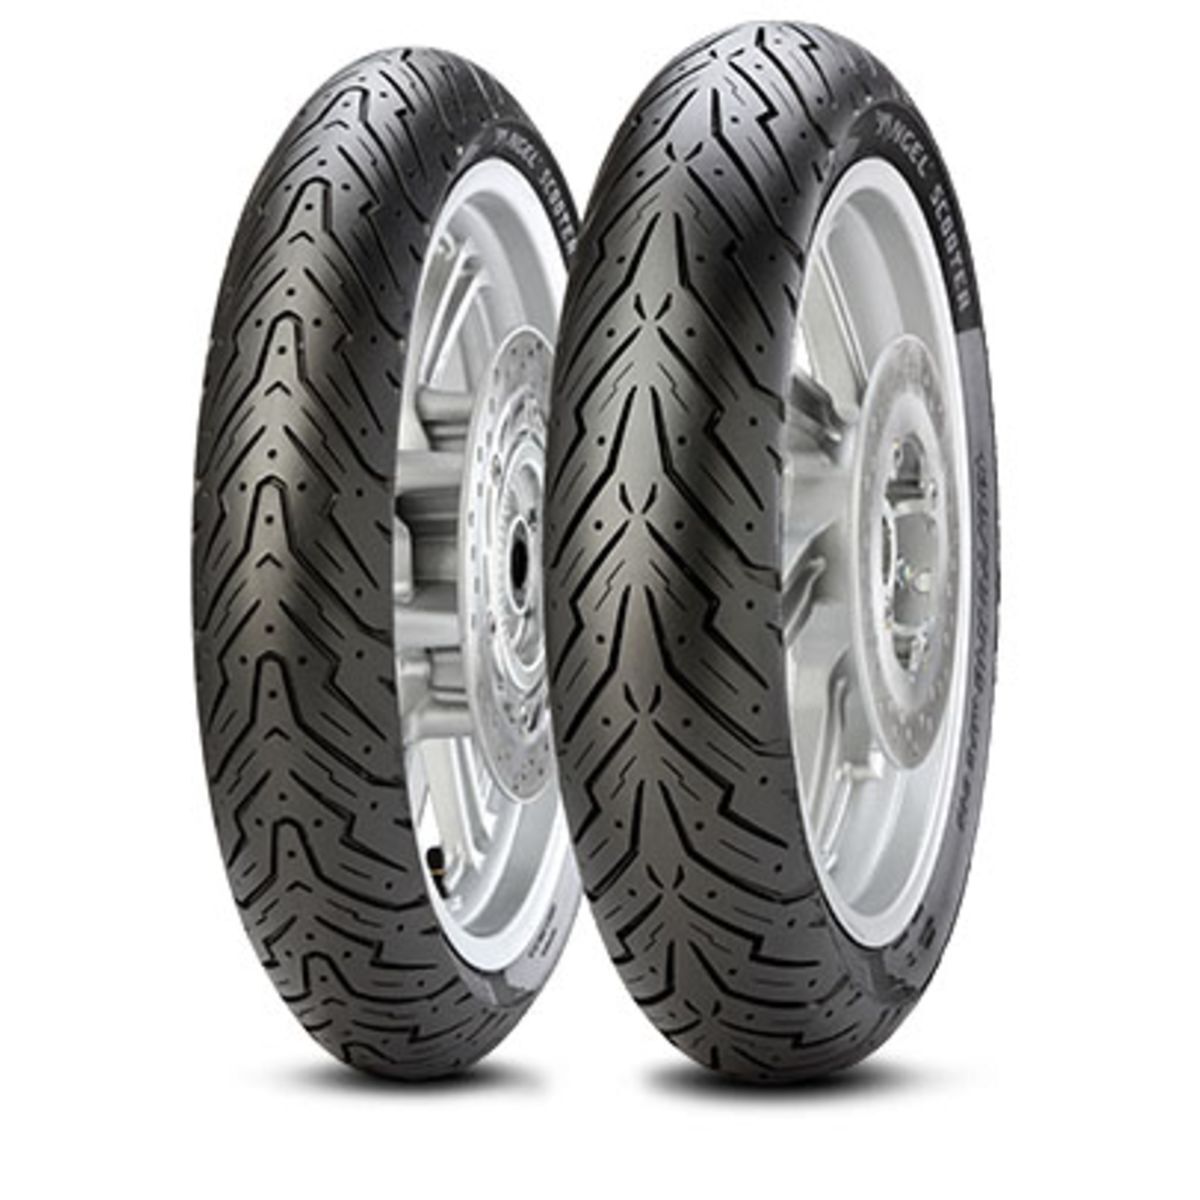 Pirelli Pneumatico scooter ANGEL SCOOTER 120/70-15 TL 56P